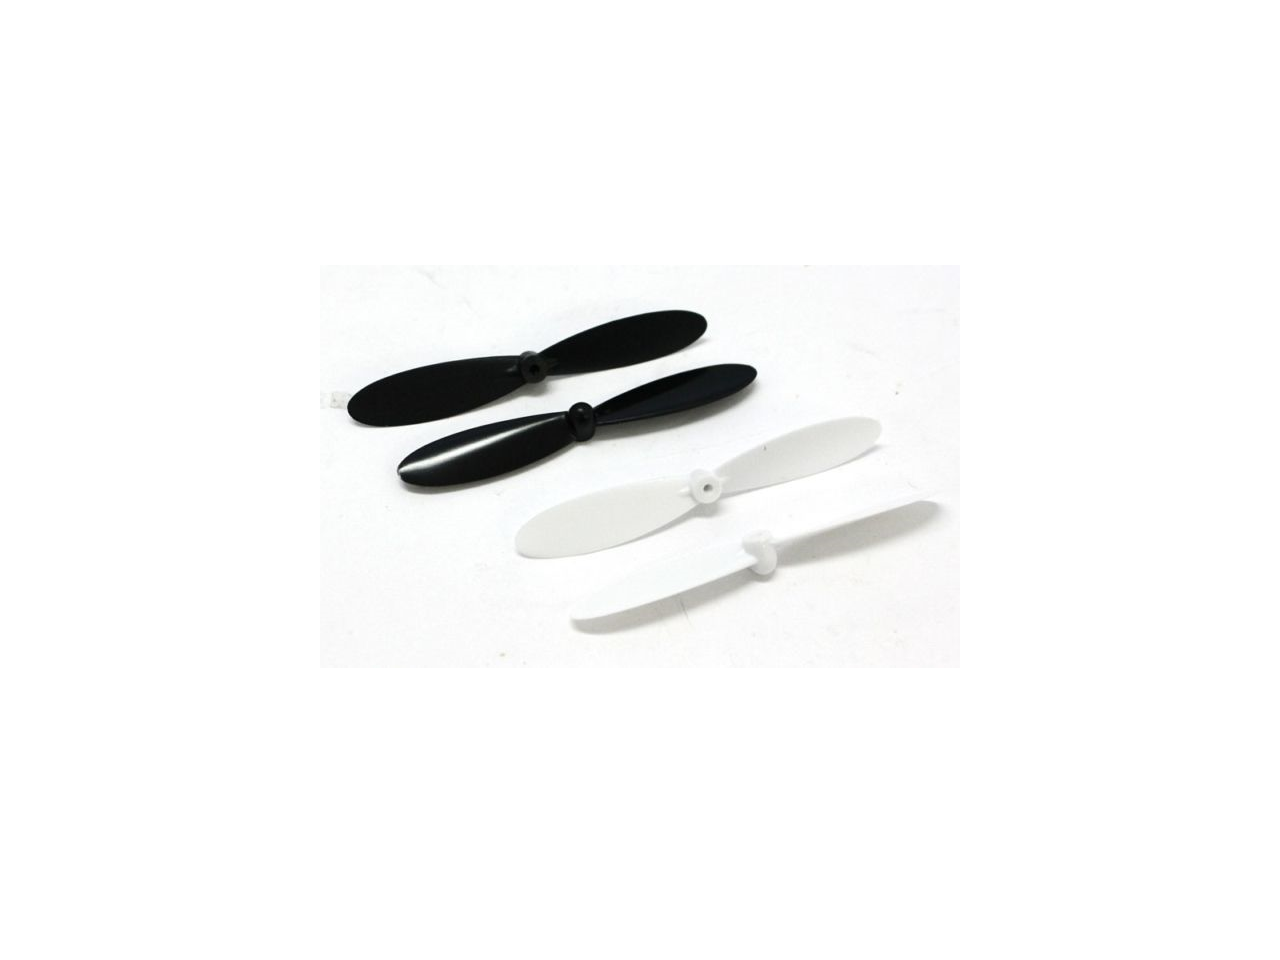 Yi Zhan X4 H107-A02 Propellers 55mm Blades Props Main Rotors Set 3 Pack 